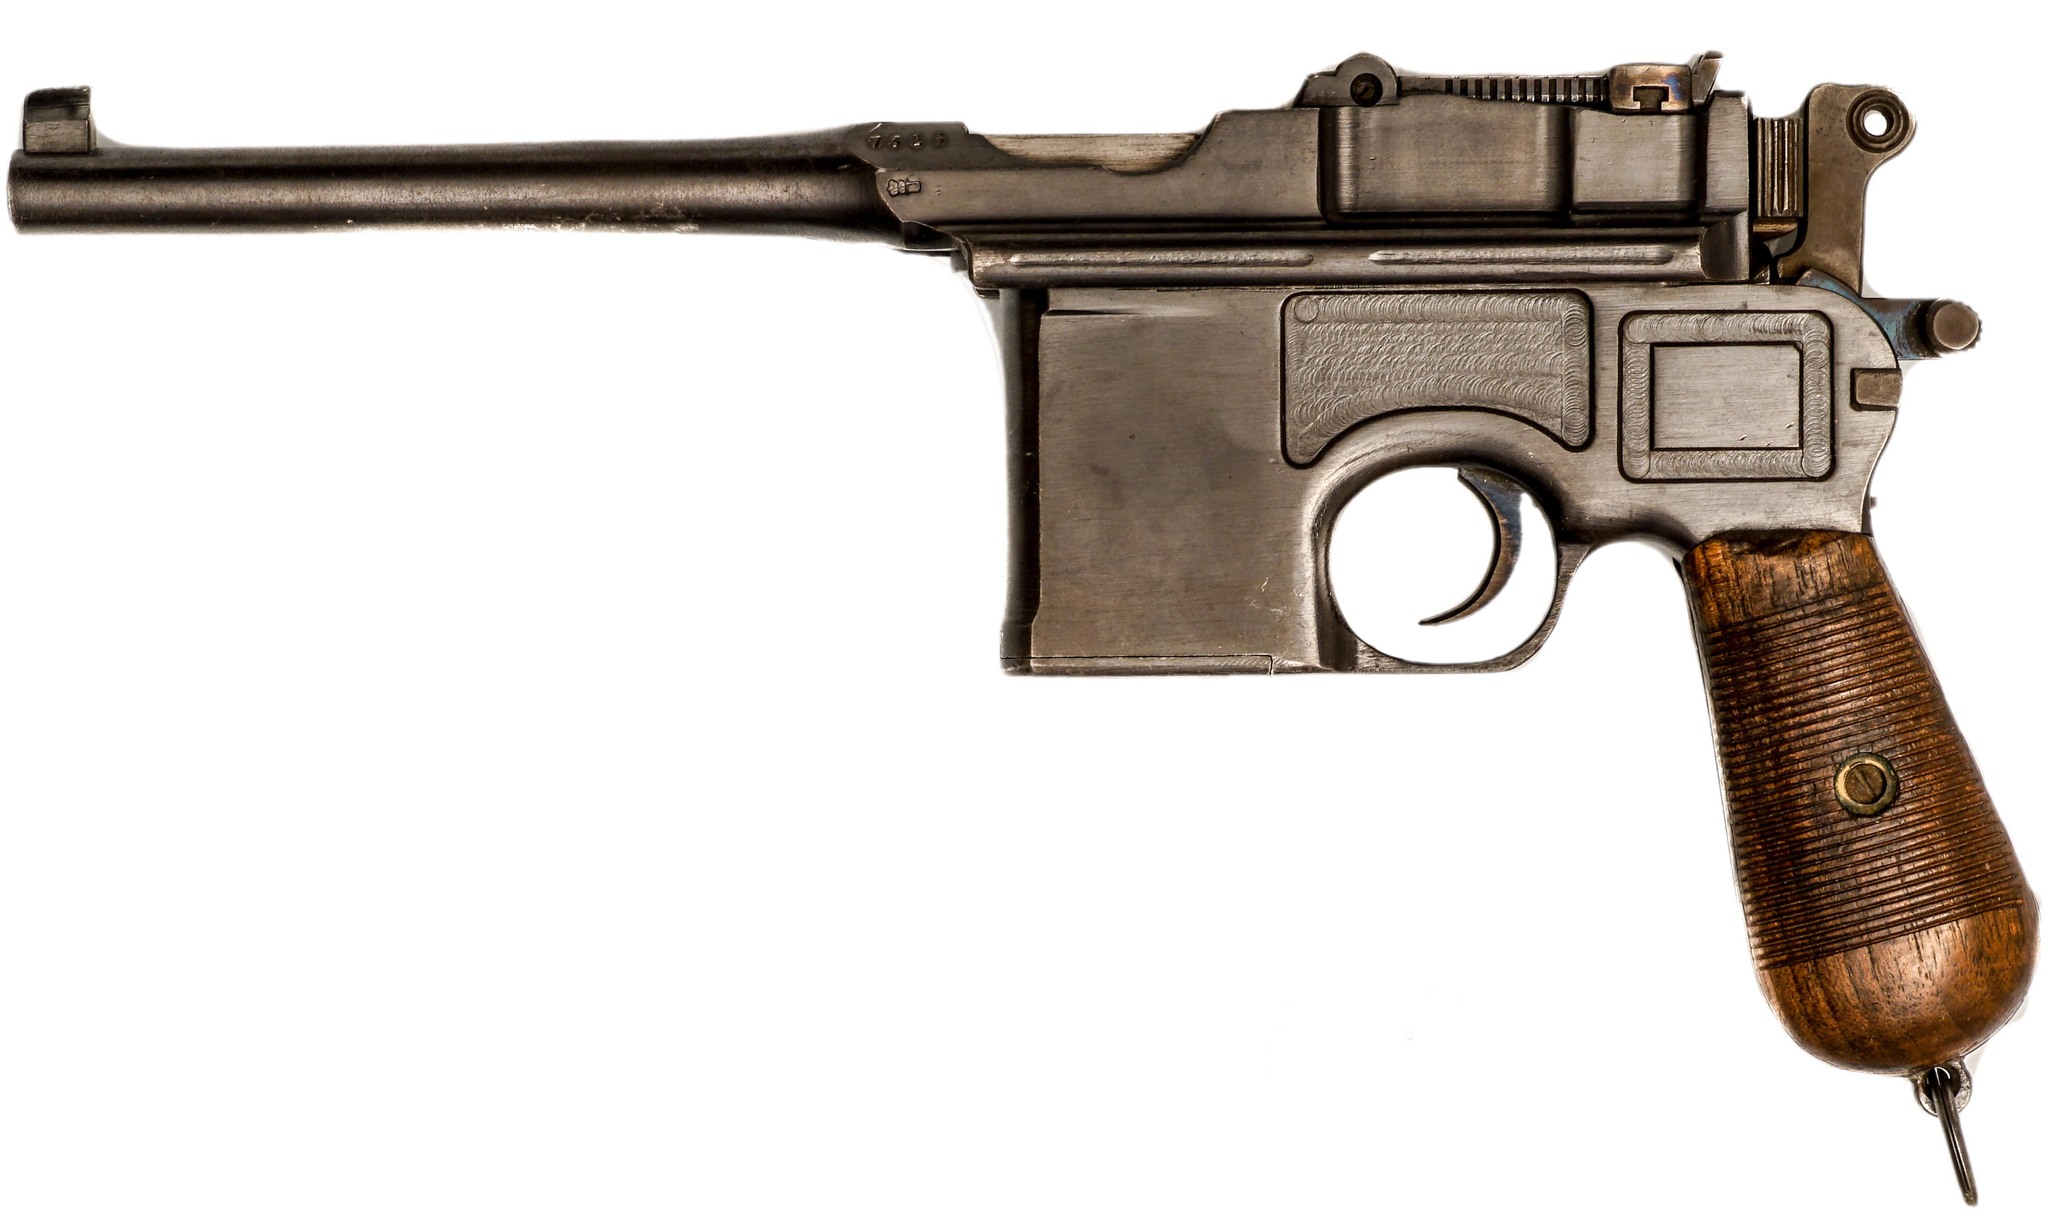 It was not adopted by any army, but at the same time it was actively used - Informative, Weapon, Российская империя, Longpost, Nagant, Firearms, Mauser K-96, Nagant Pistol, Mauser